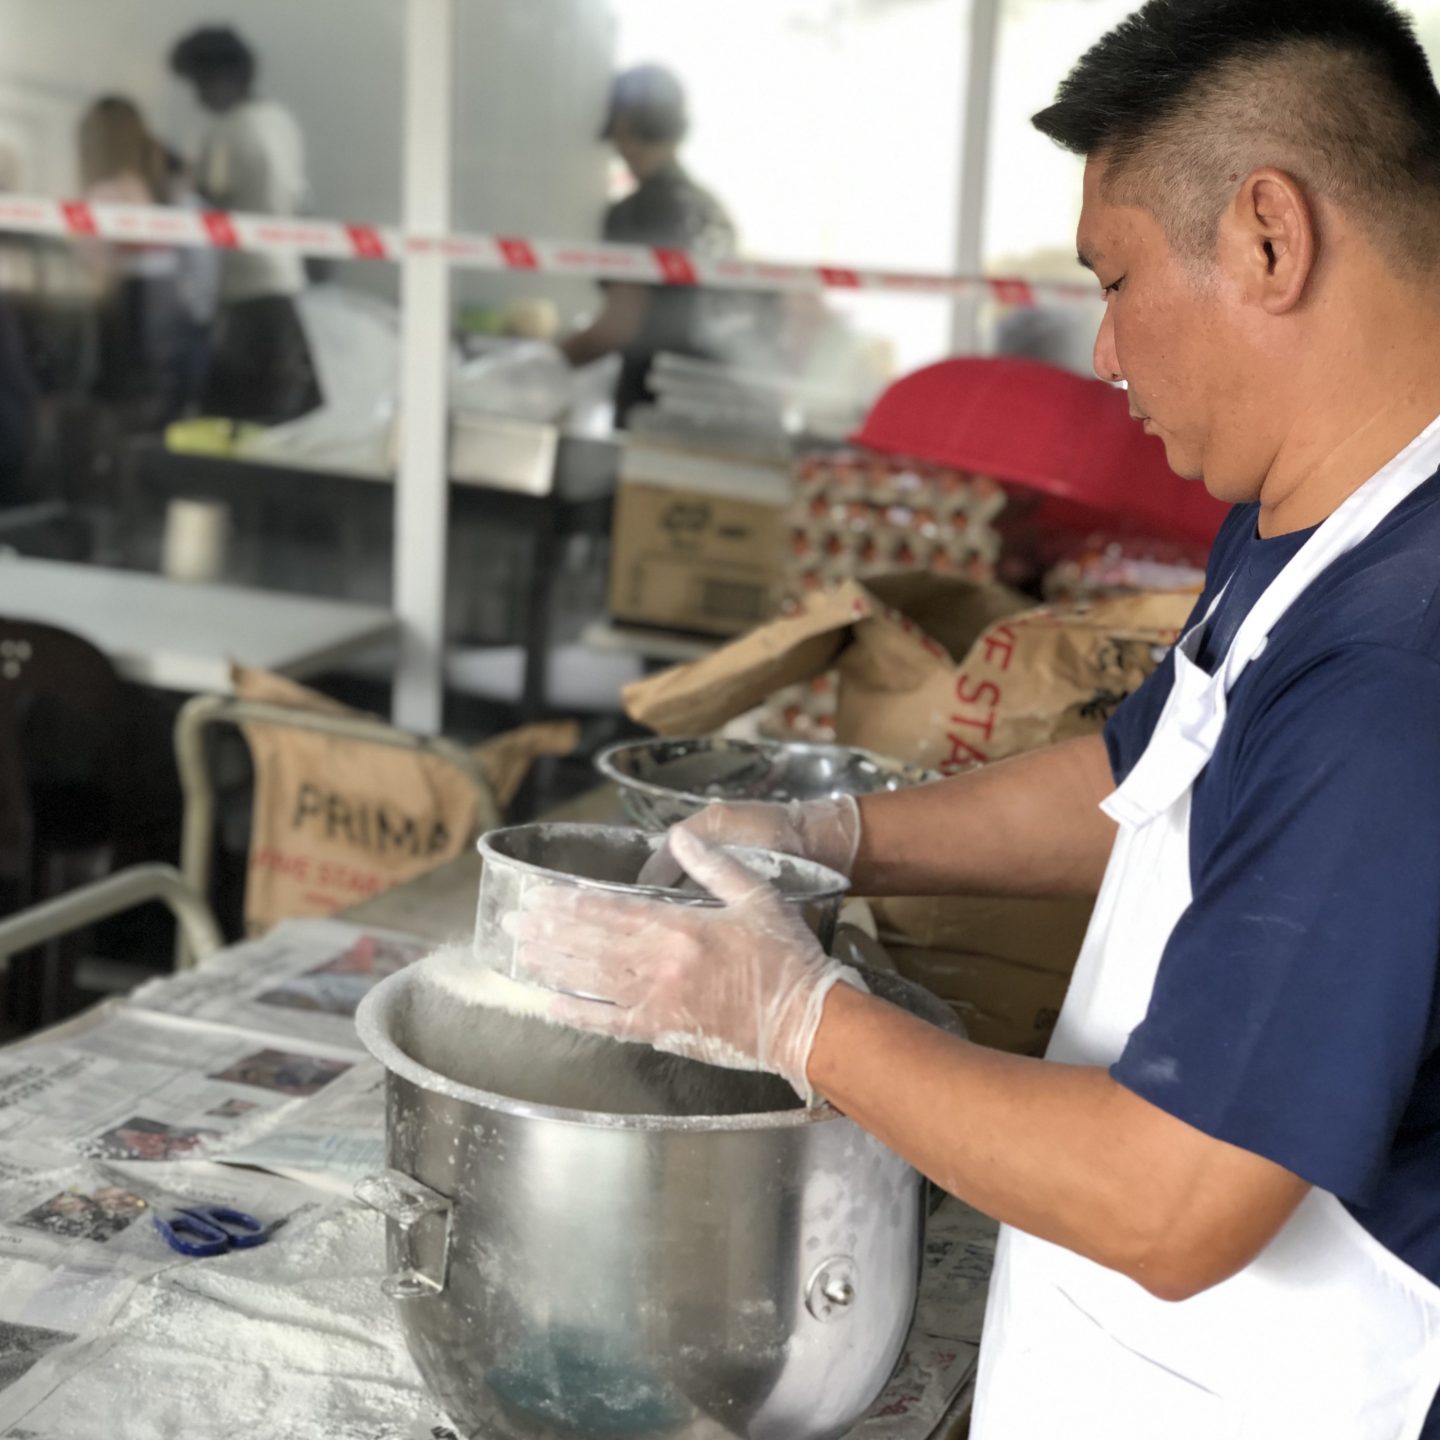 A resident sifting flour, preparing the next batch of pastry. THP uses 2,500kg of flour and 3,000 sticks of SCS butter every Chinese New Year. Photo by Geraldine Tan.